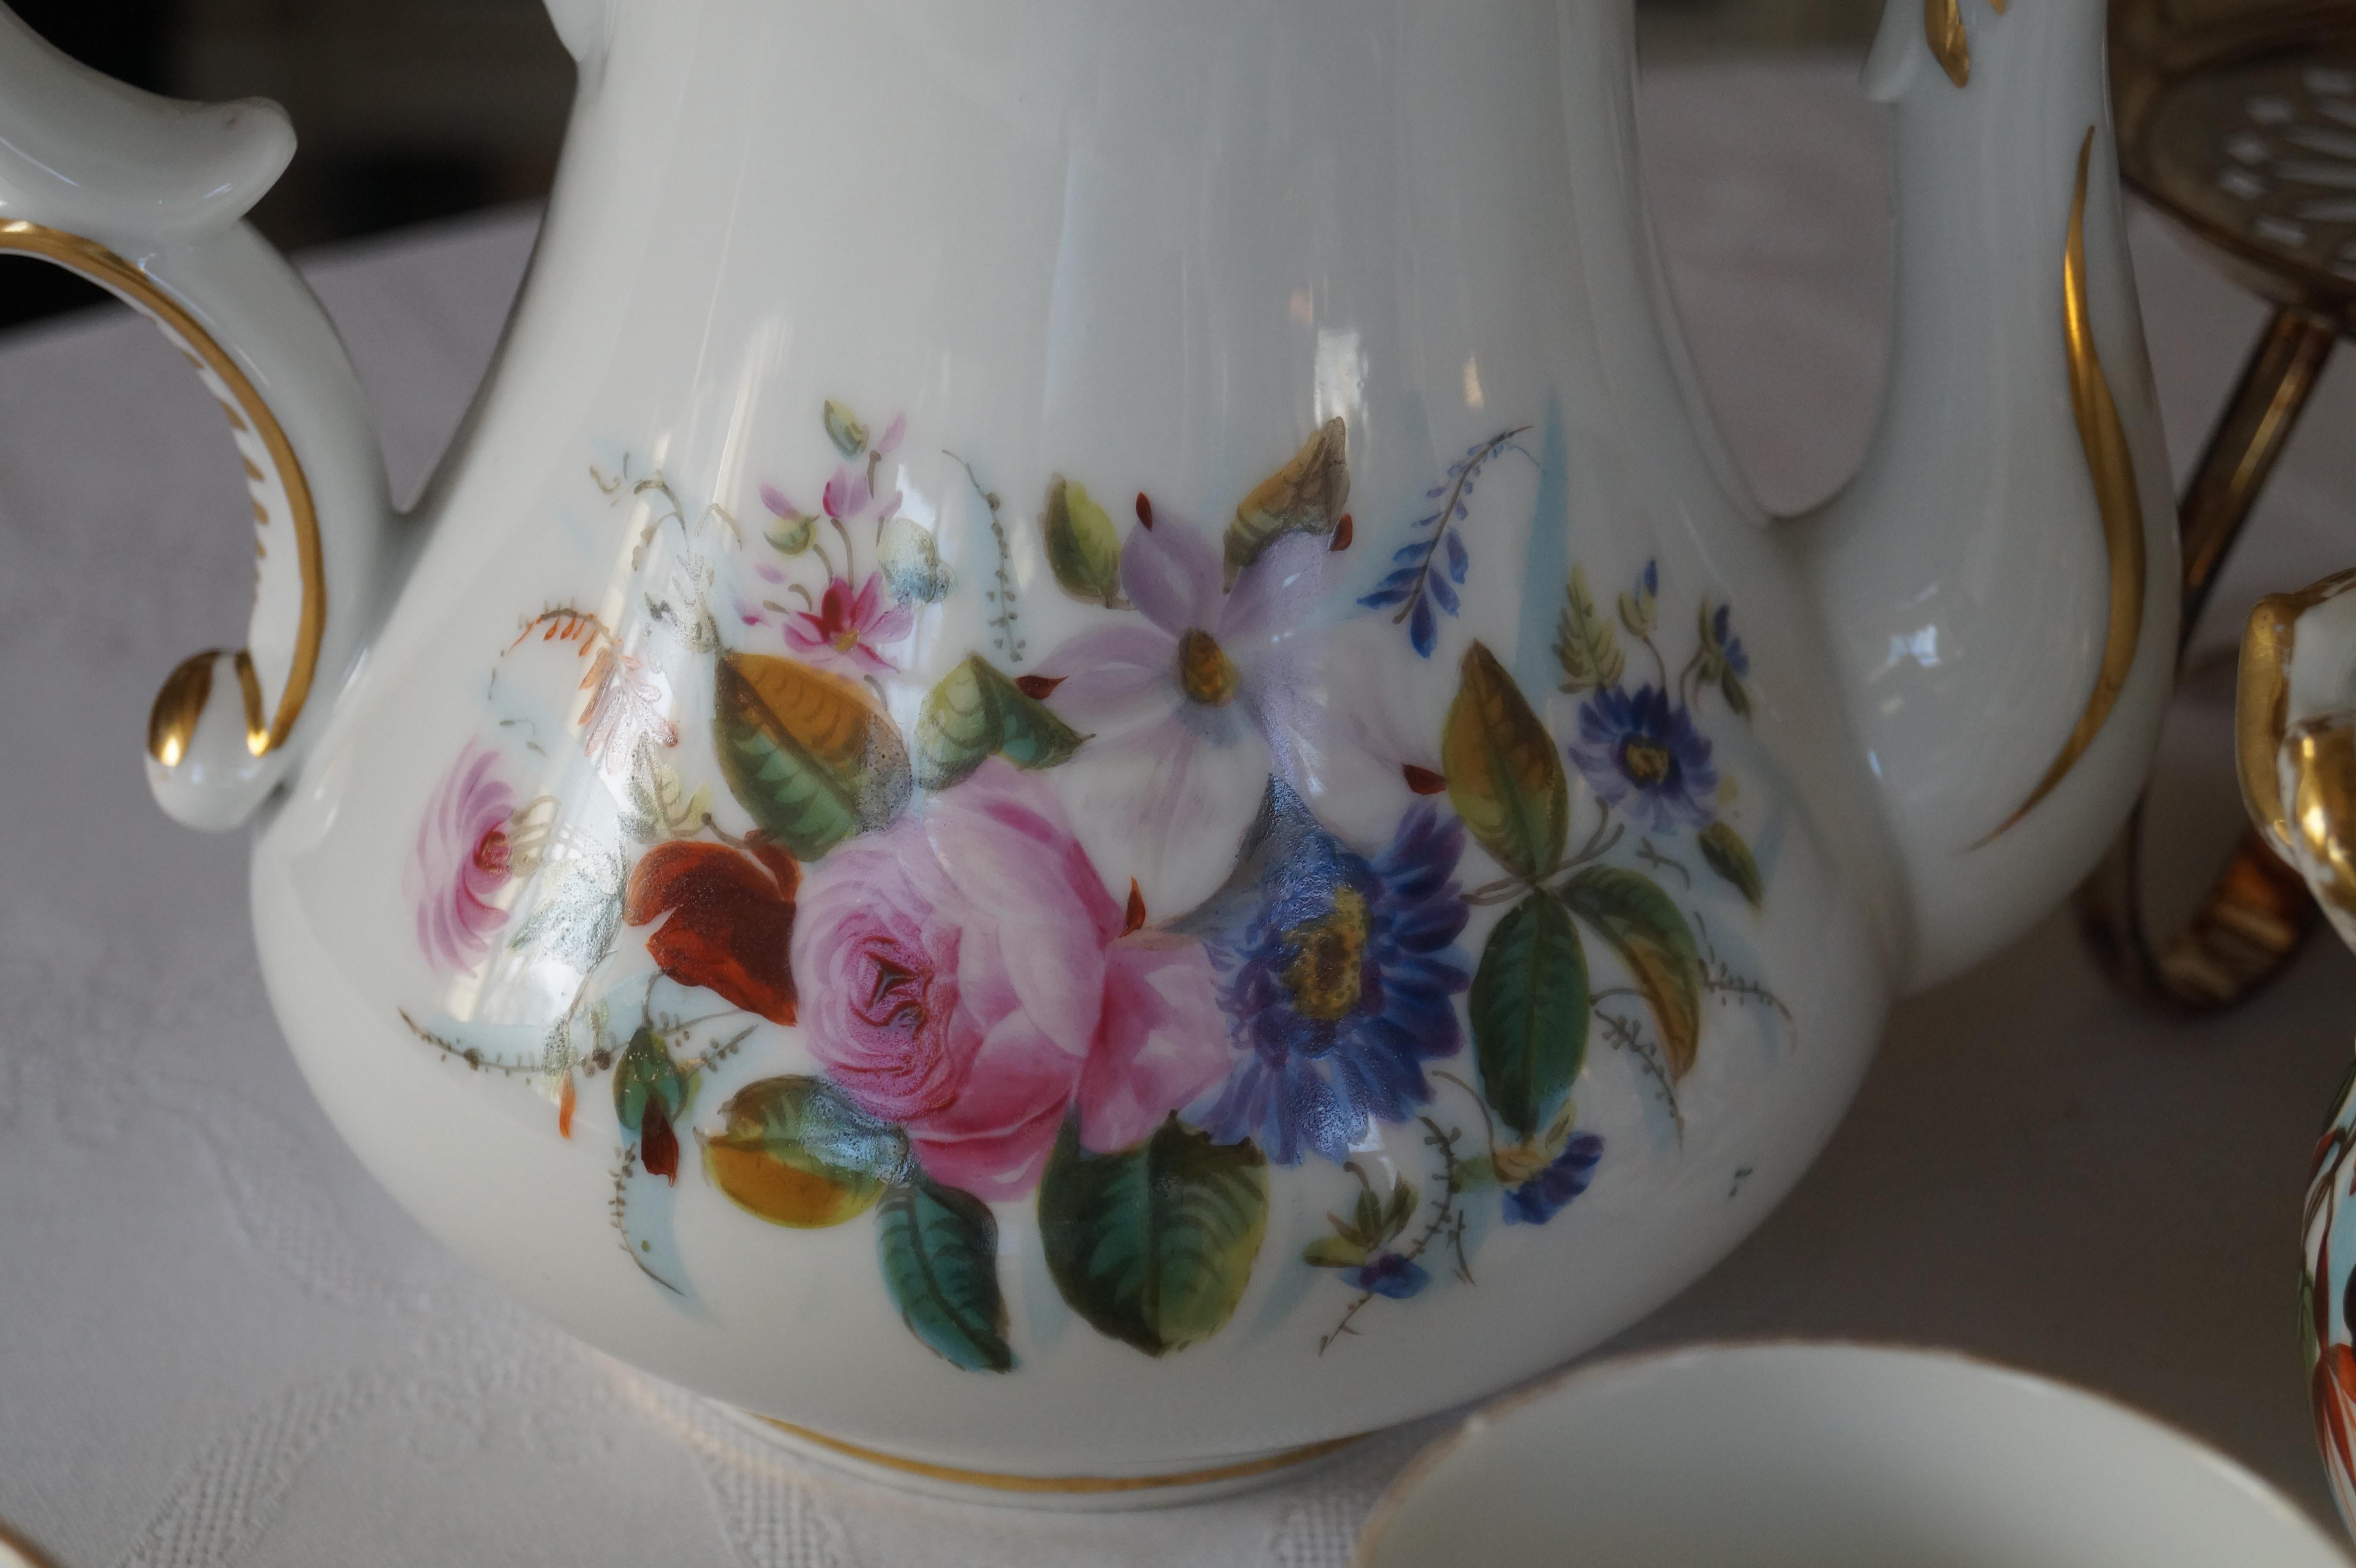 Beautiful antique Old Paris porcelain (Porcelaine de Paris) coffee service. Handpainted with bouquet of flowers and finished with gold decorations. The sugar bowl and creamer were added later, these differ in style. These 2 items are painted on